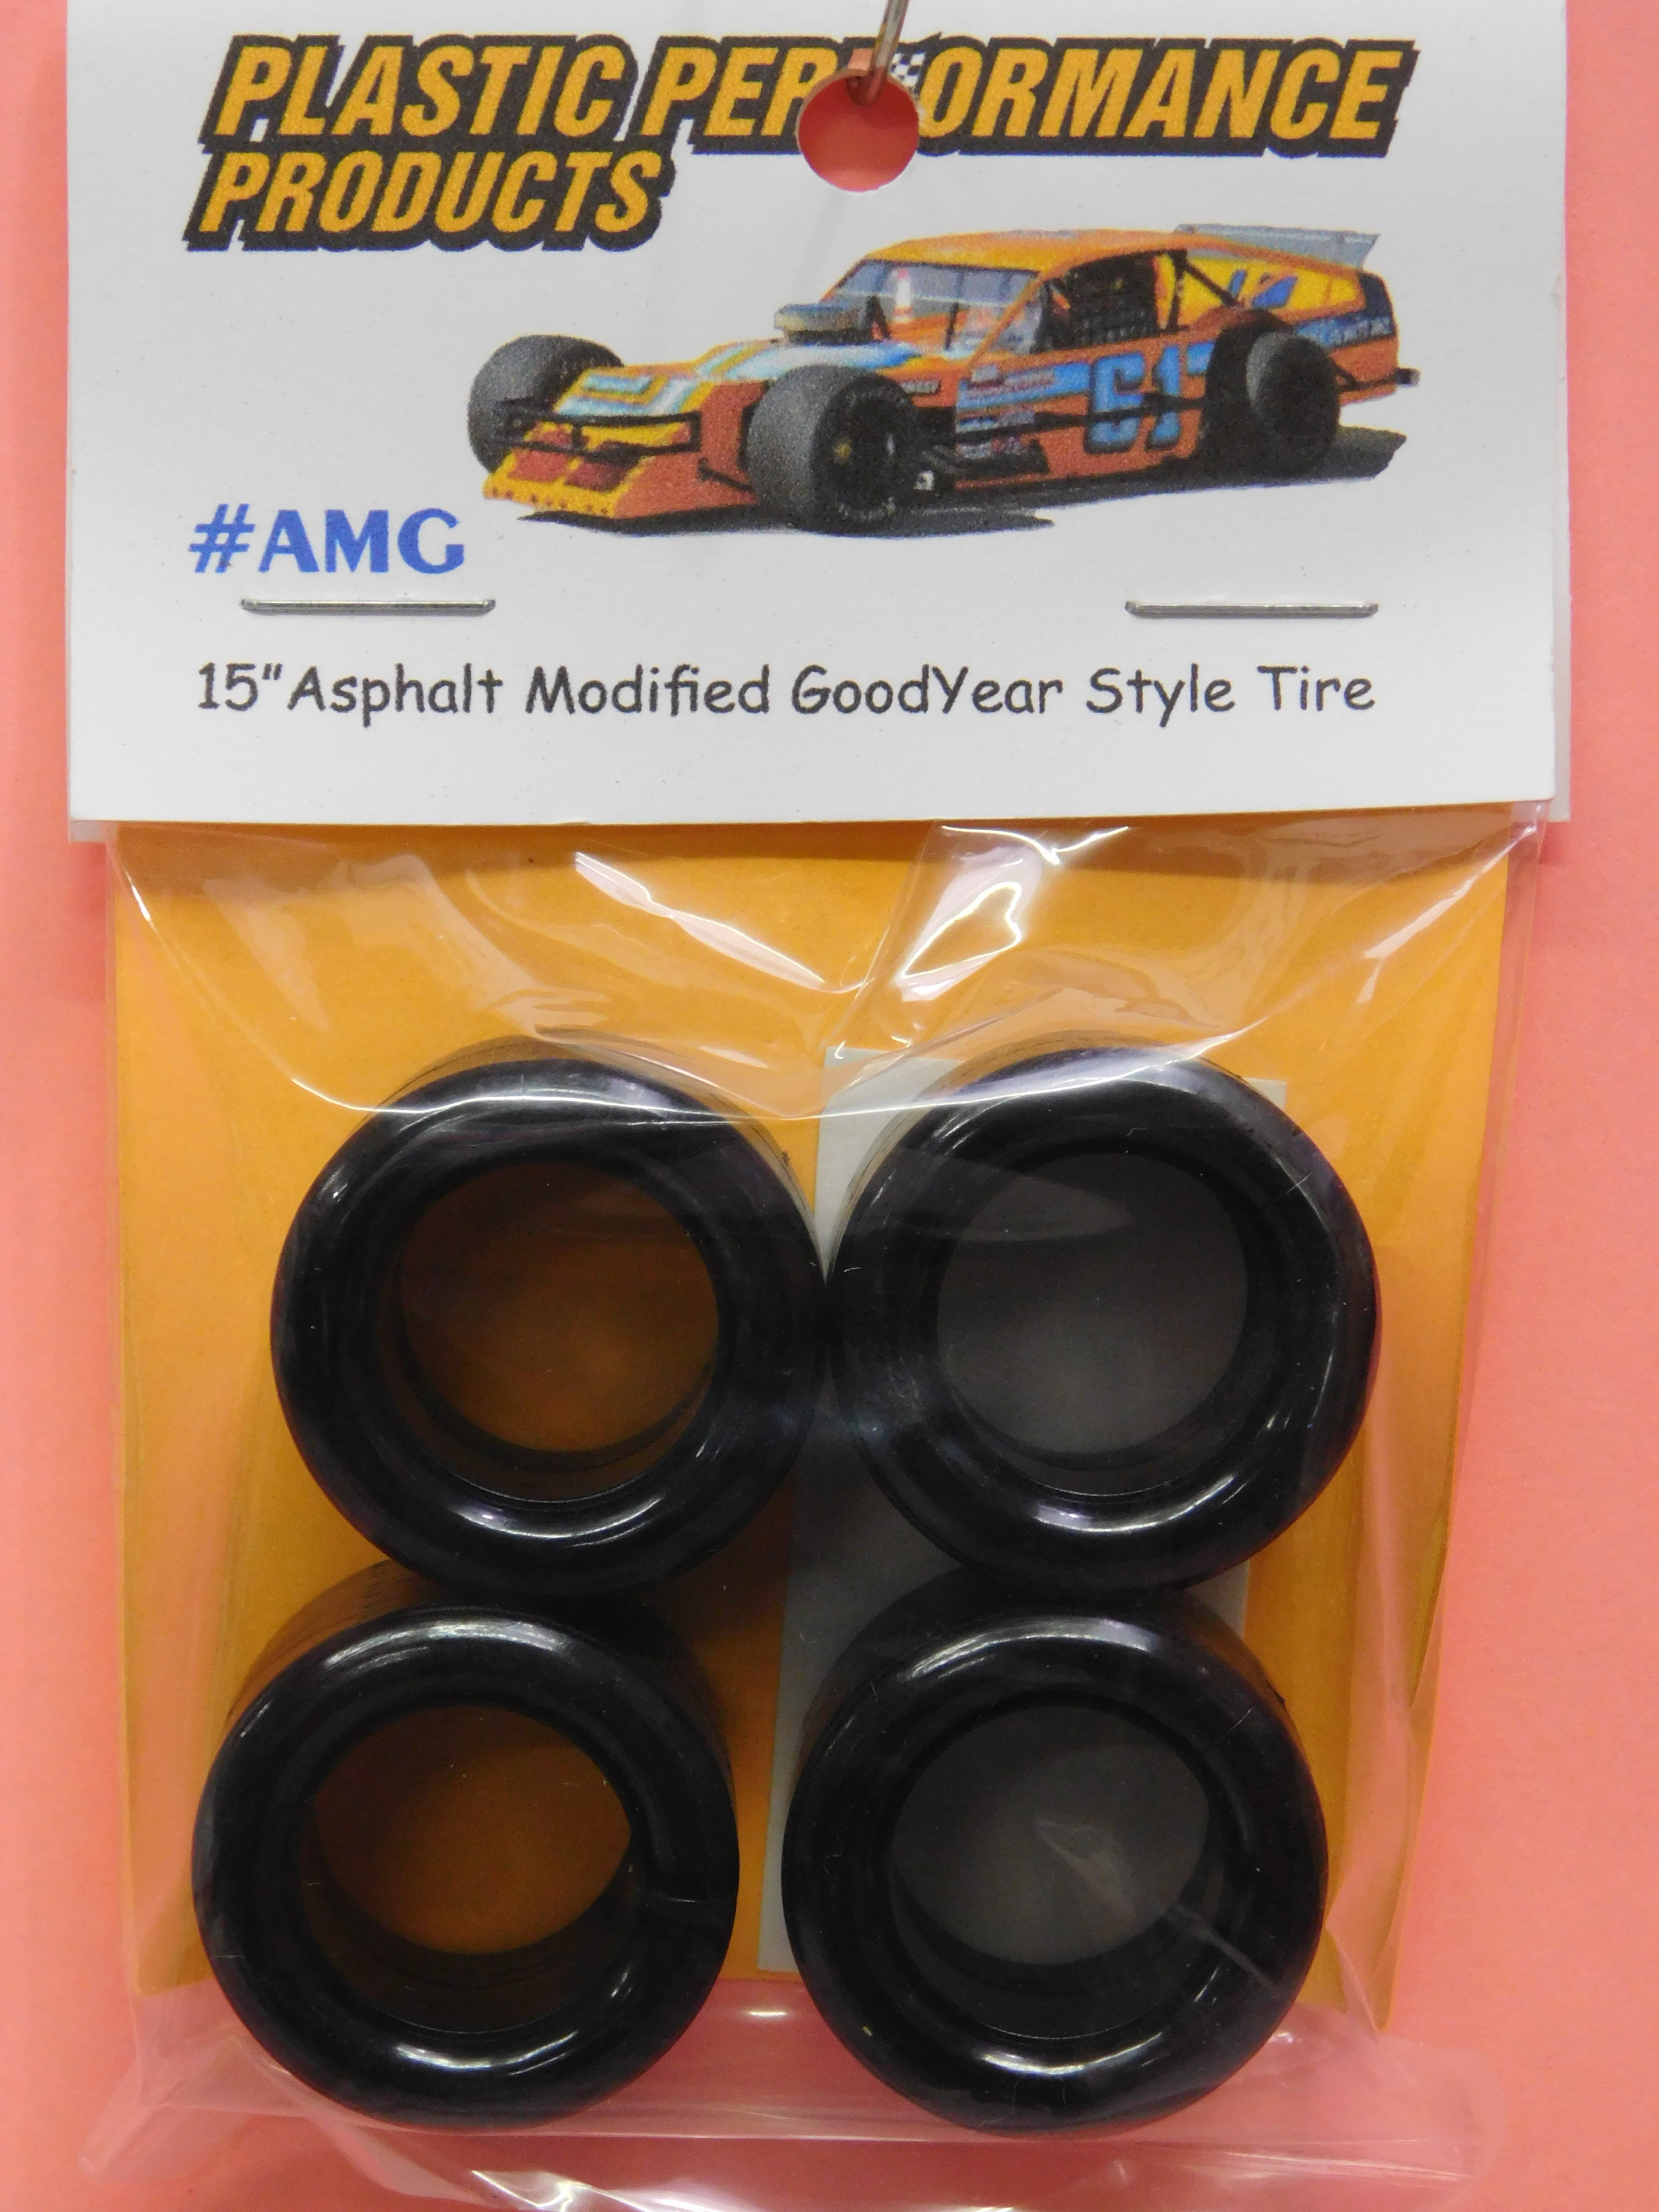 ST 2090F 1/64 HO Scale Slot Car Tire for Life-Like Trucks and "M" Chassis Fronts 